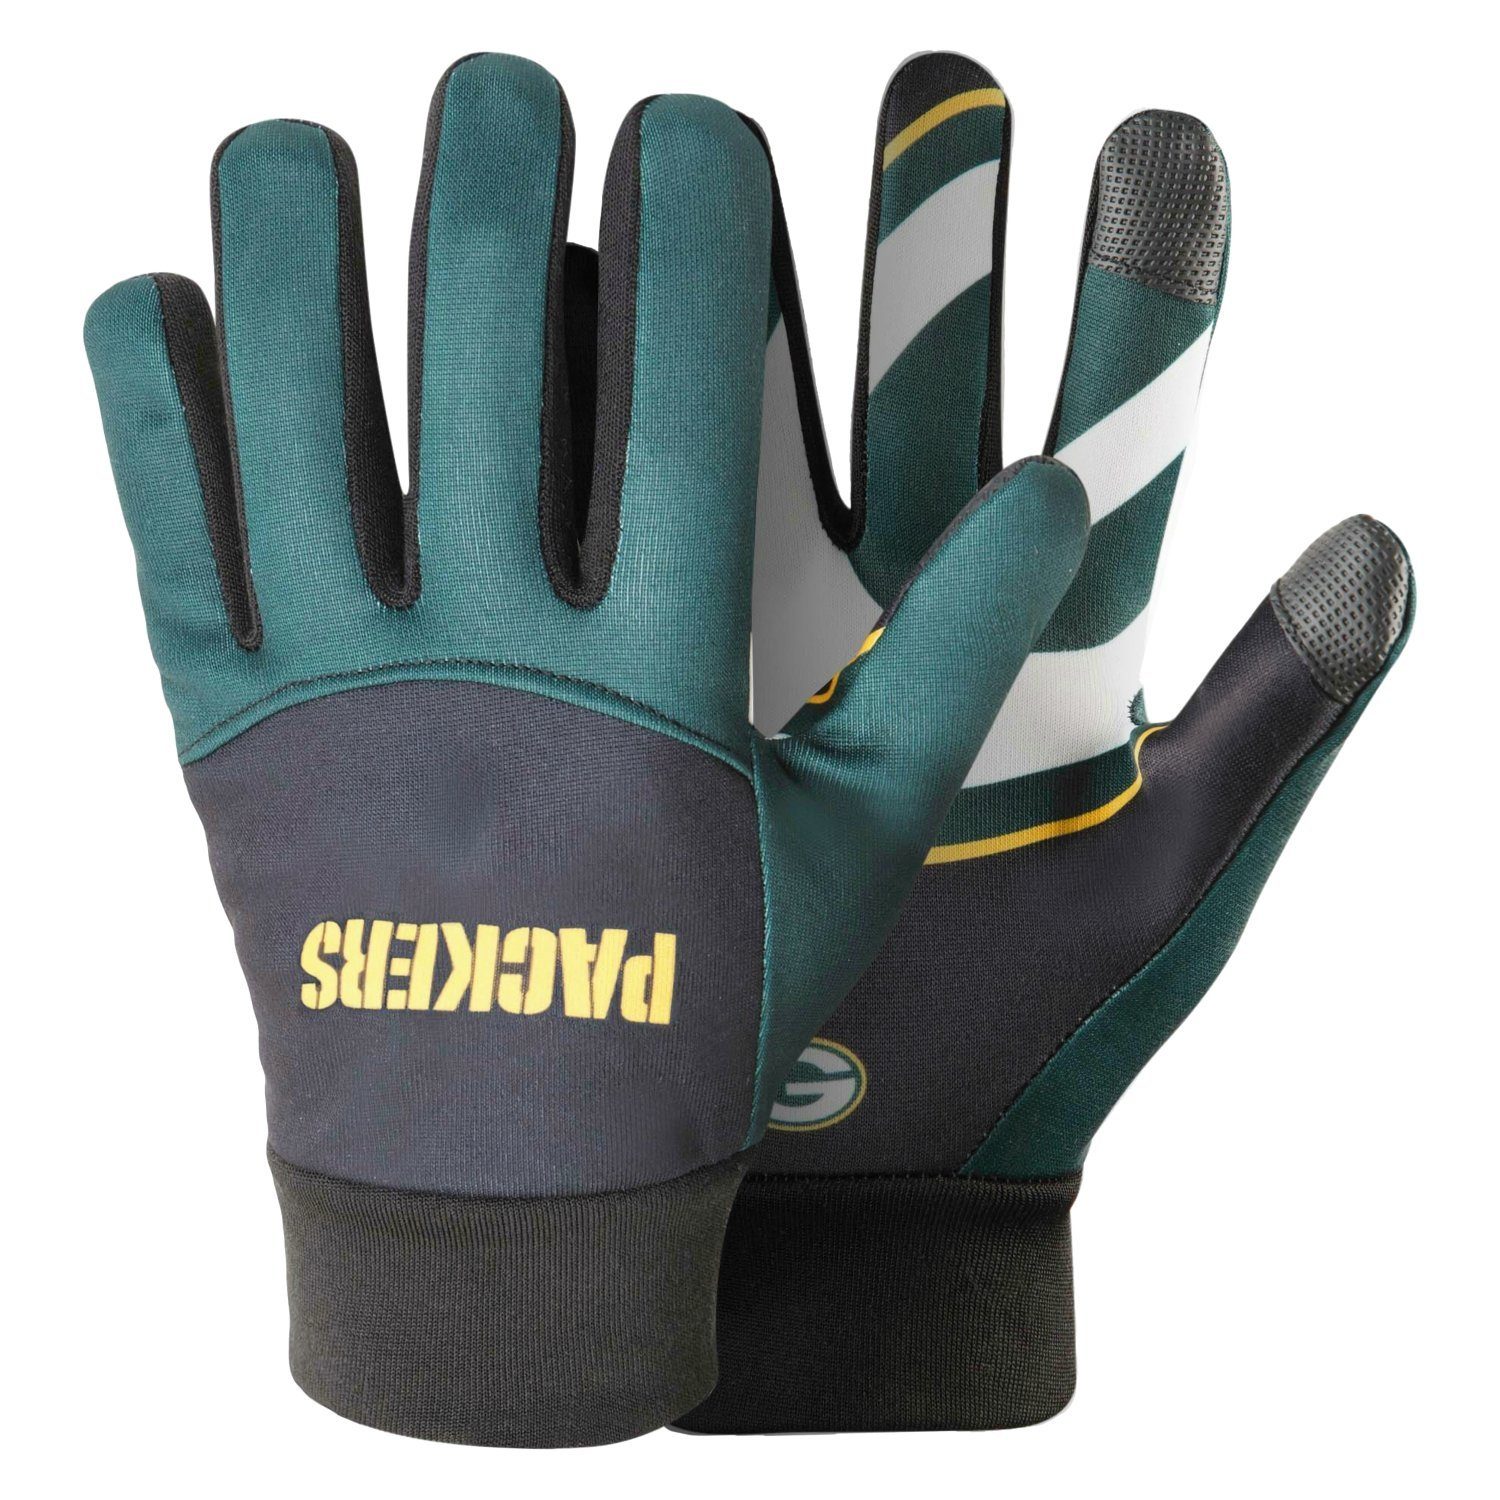 Forever Collectibles Multisporthandschuhe NFL Handschuhe LOGO Green Bay Packers